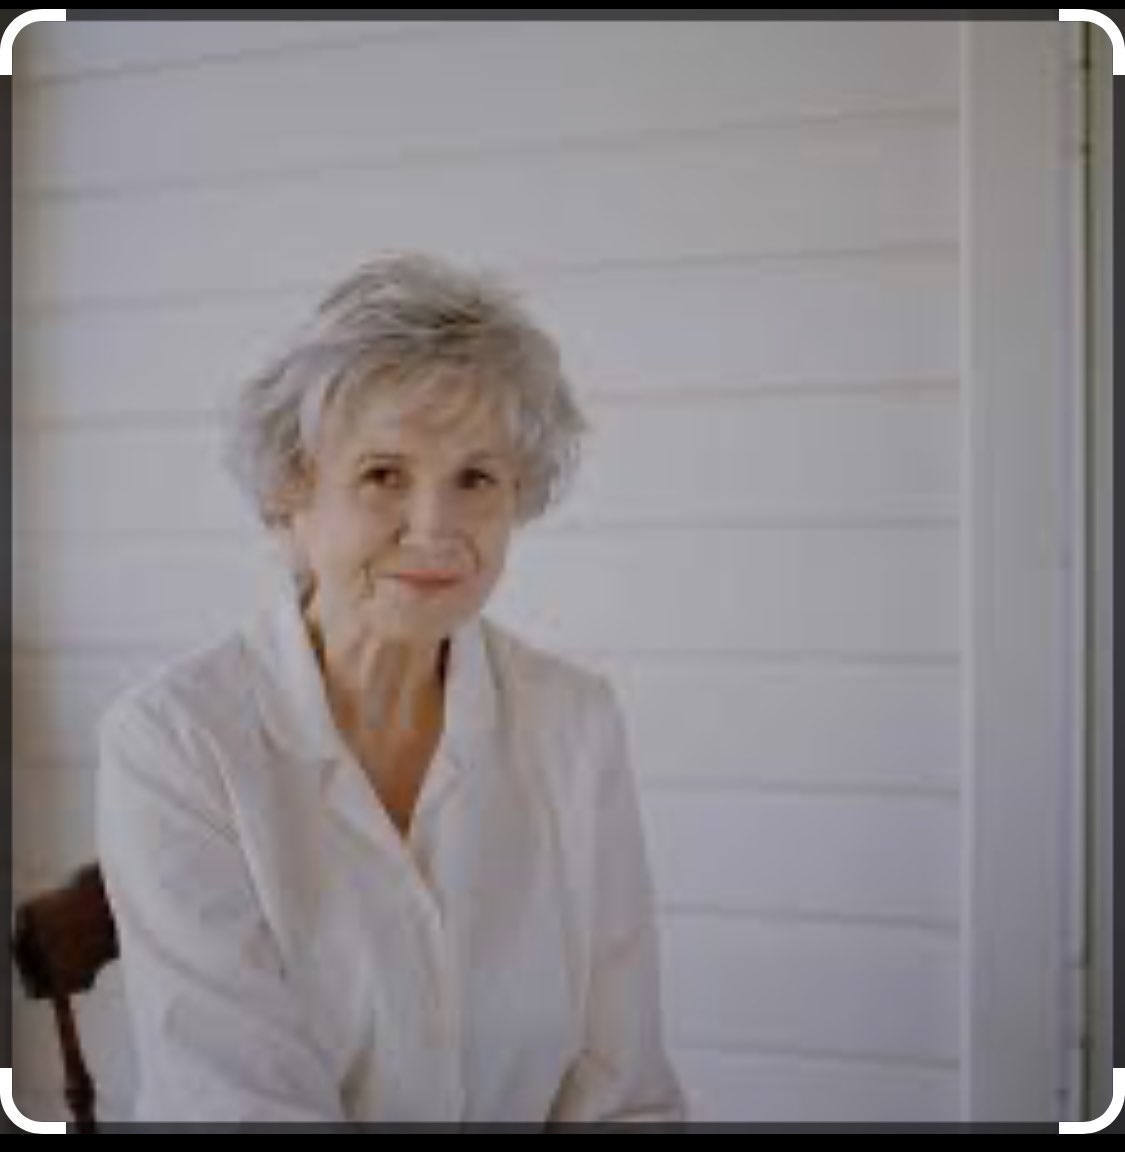 We’ve lost one of the greats. Alice Munro. I was among the privileged at @NewYorker who got to work with her, which really amounted to spending extra time—happy hours in fact—in among her sentences. What a subtle brilliant talent